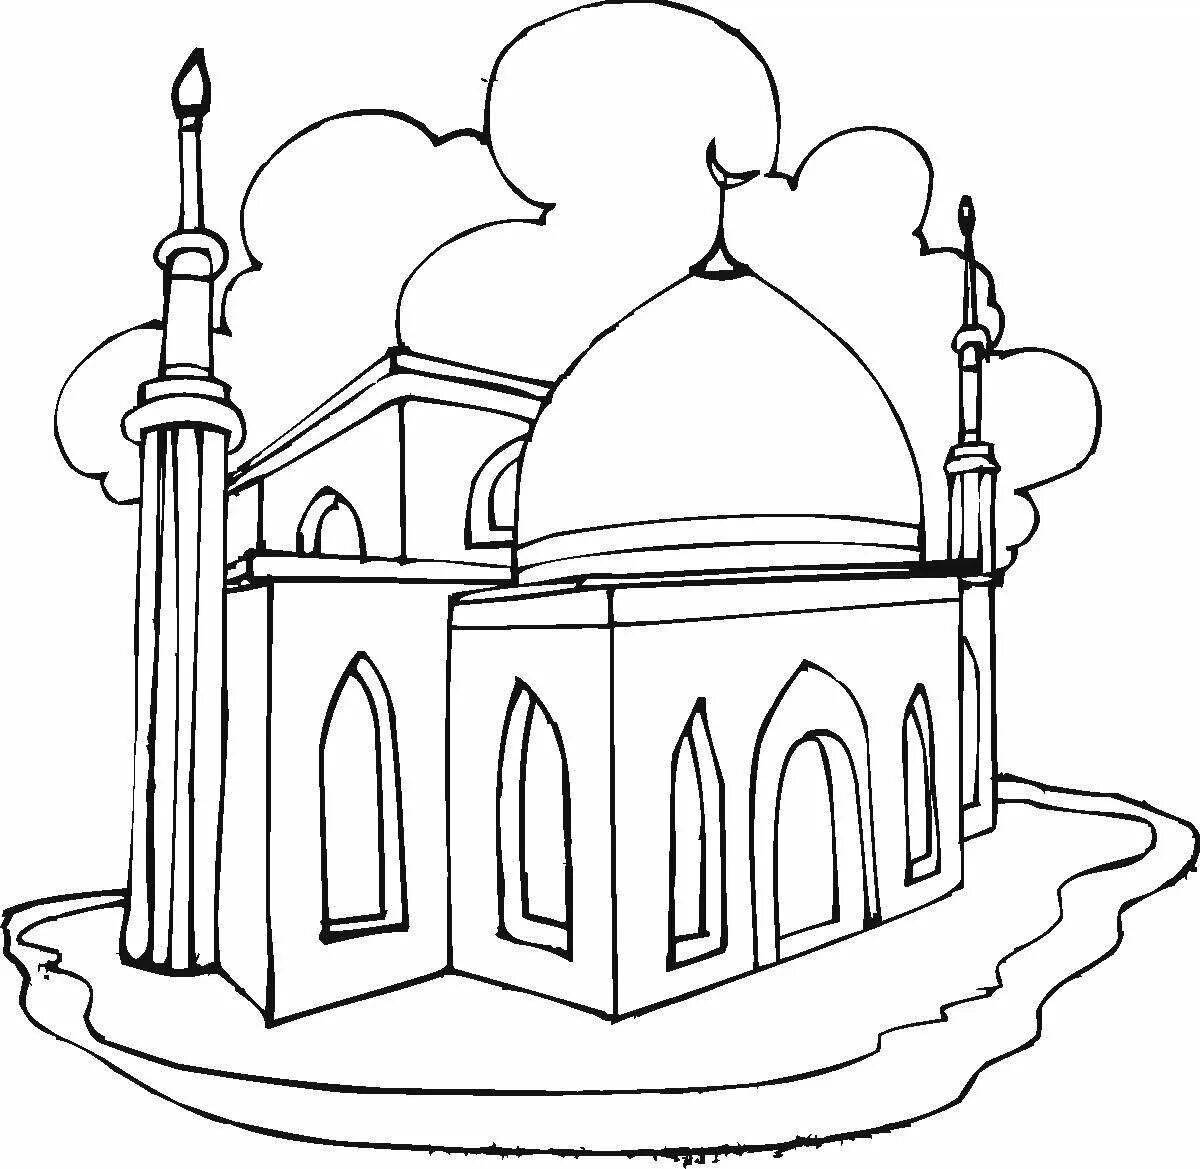 Mosque fun coloring for kids